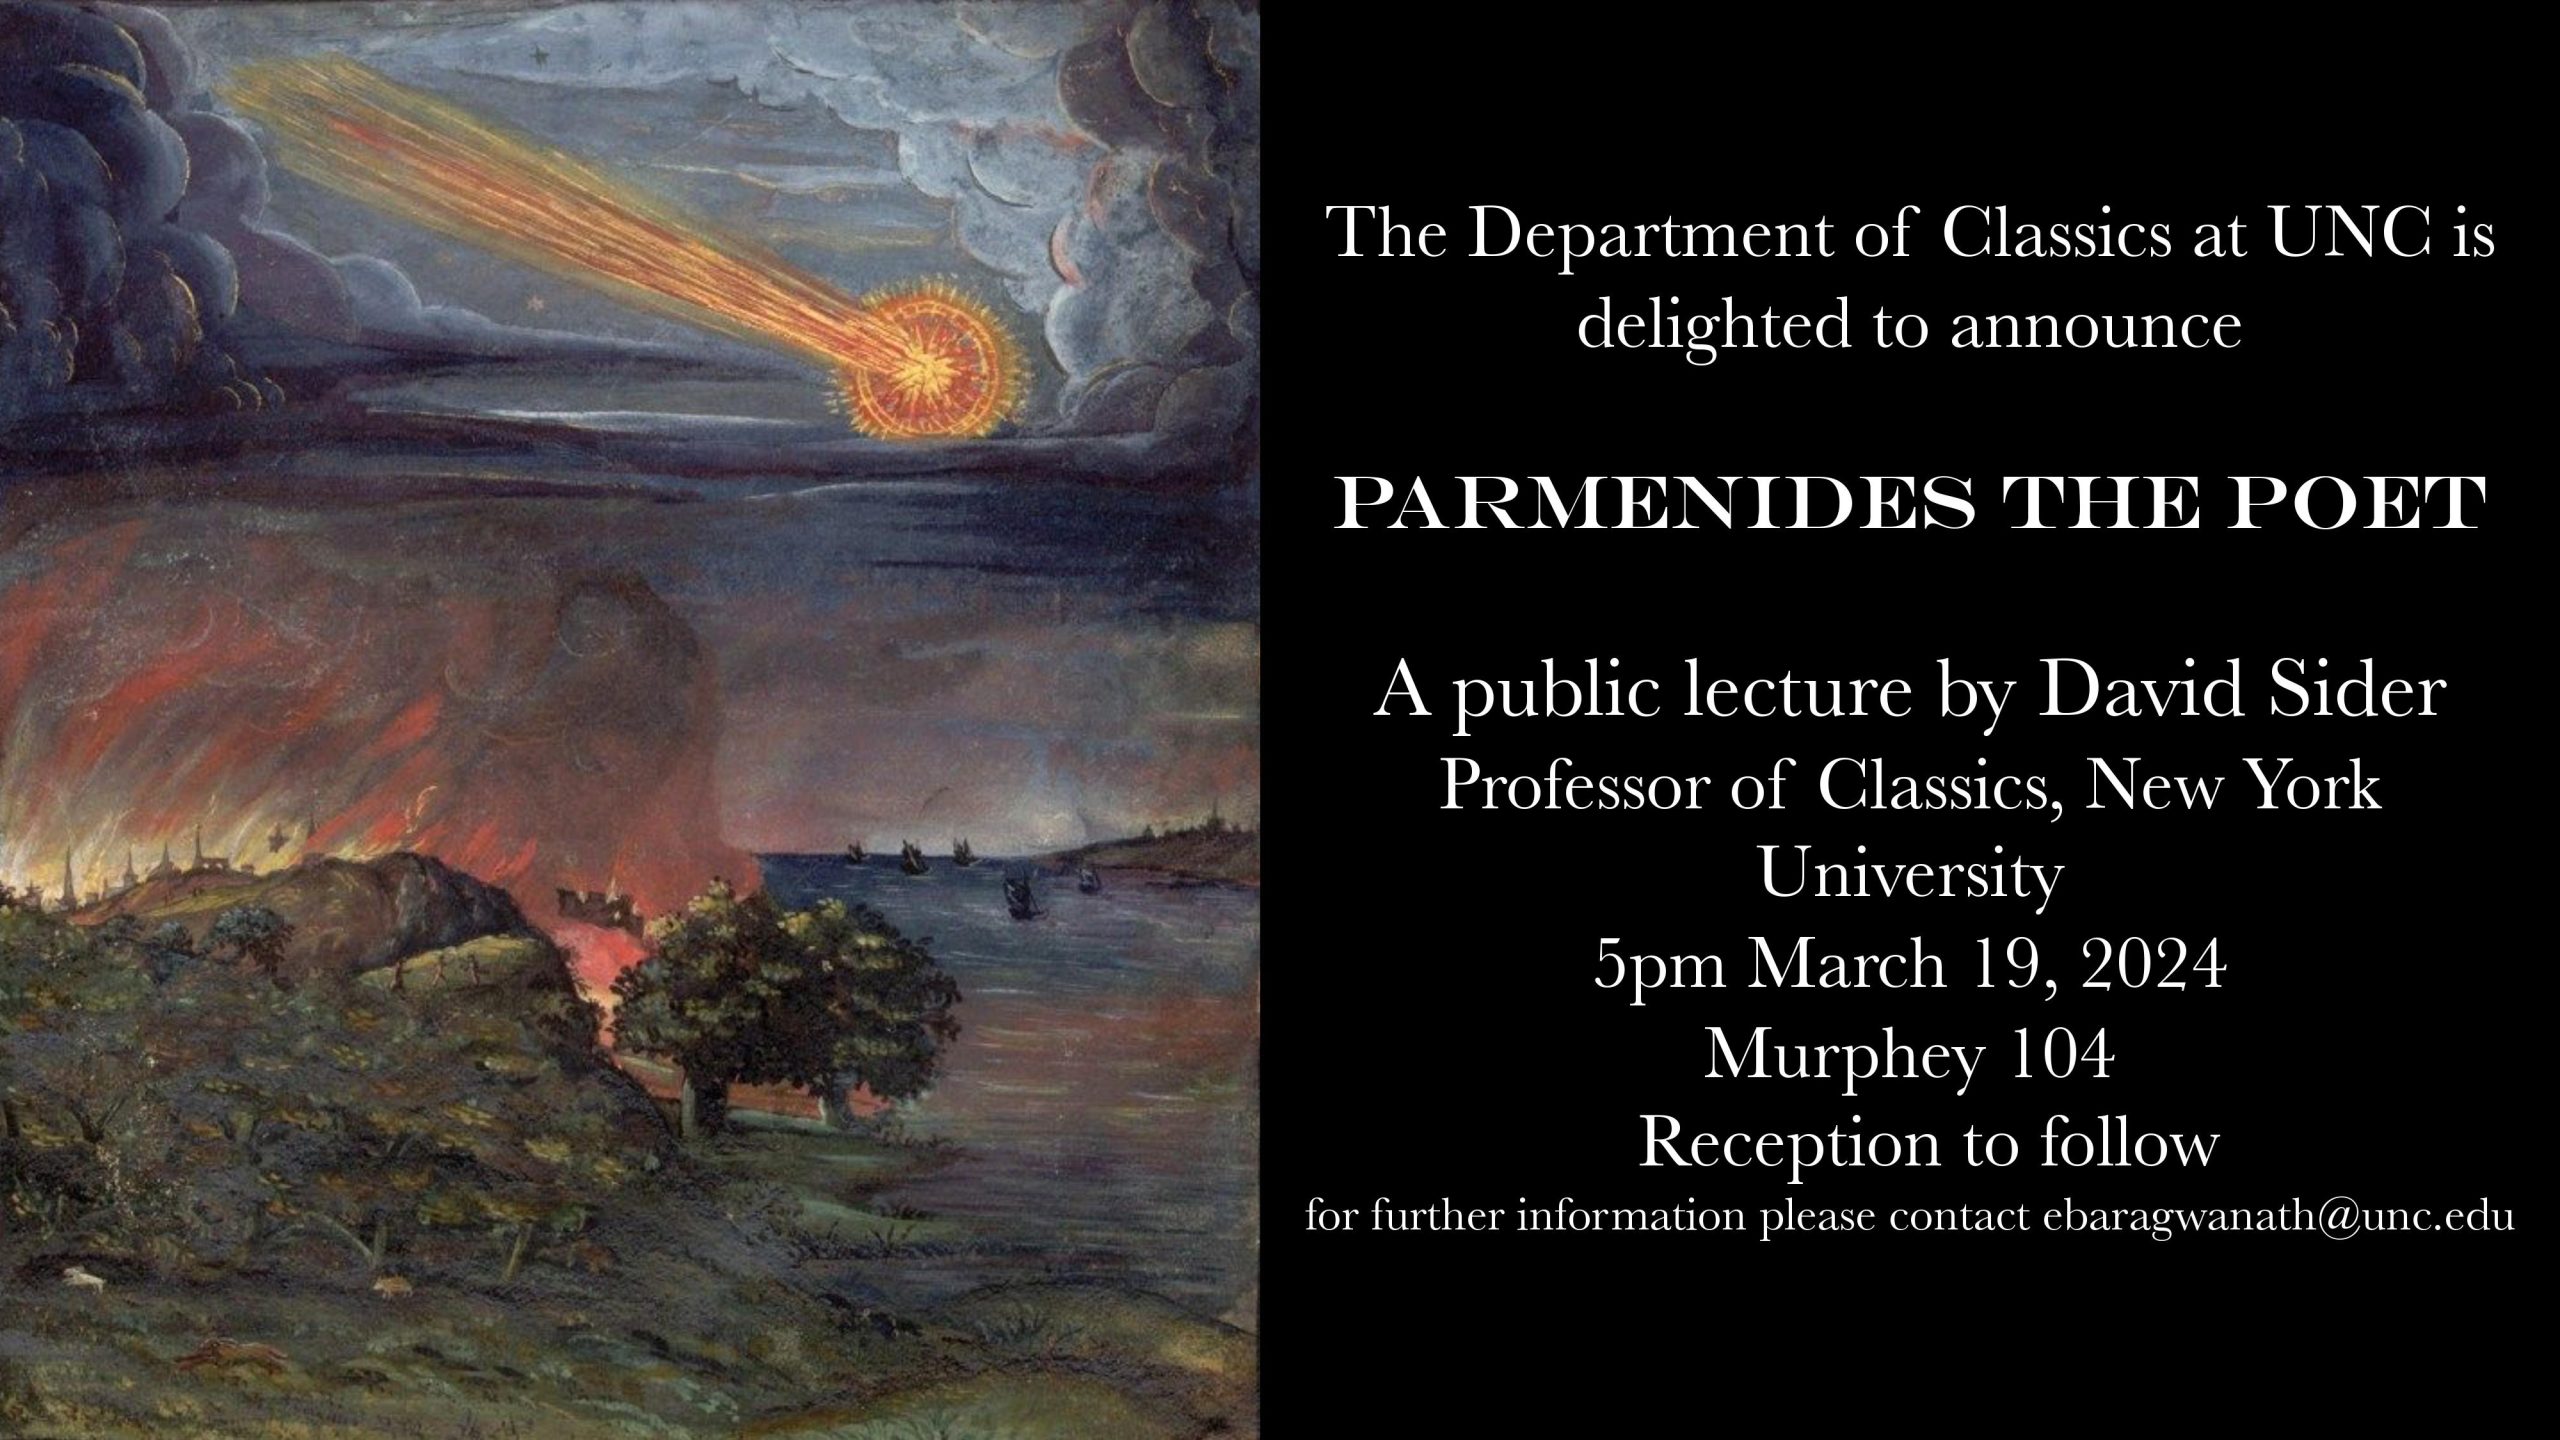 The Department of Classics at UNC is delighted to announce Parmenides the Poet: A Public Lecture by David Sider, Professor of Classics, New York University. The lecture will take place at 5:00 PM on March 19th, 2024 in Murphey Hall room 104. Reception to follow.